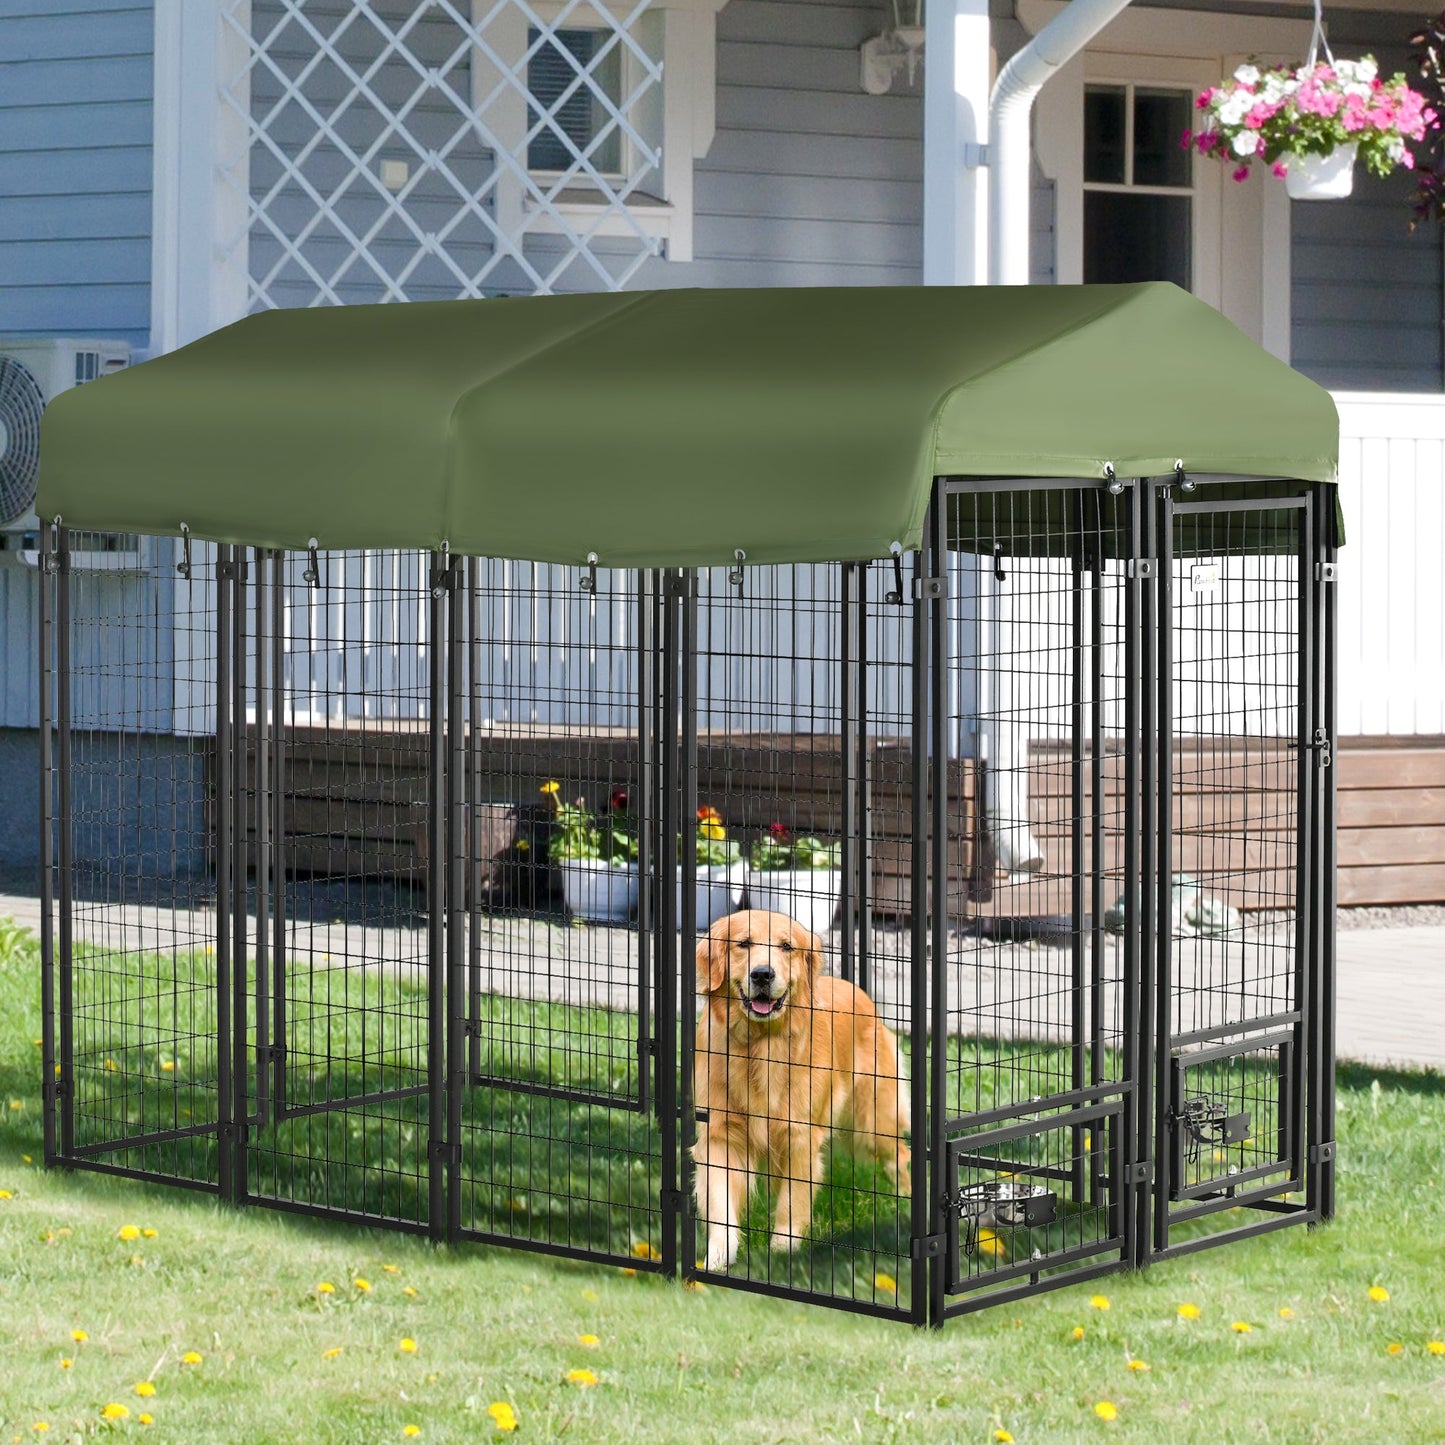 Outdoor and Garden-Outdoor Dog Kennel, Lockable Pet Playpen Crate, Welded Wire Steel Fence Dog Pan with Water/UV-Resistant Canopy, Rotating Bowl Holders & Door - Outdoor Style Company